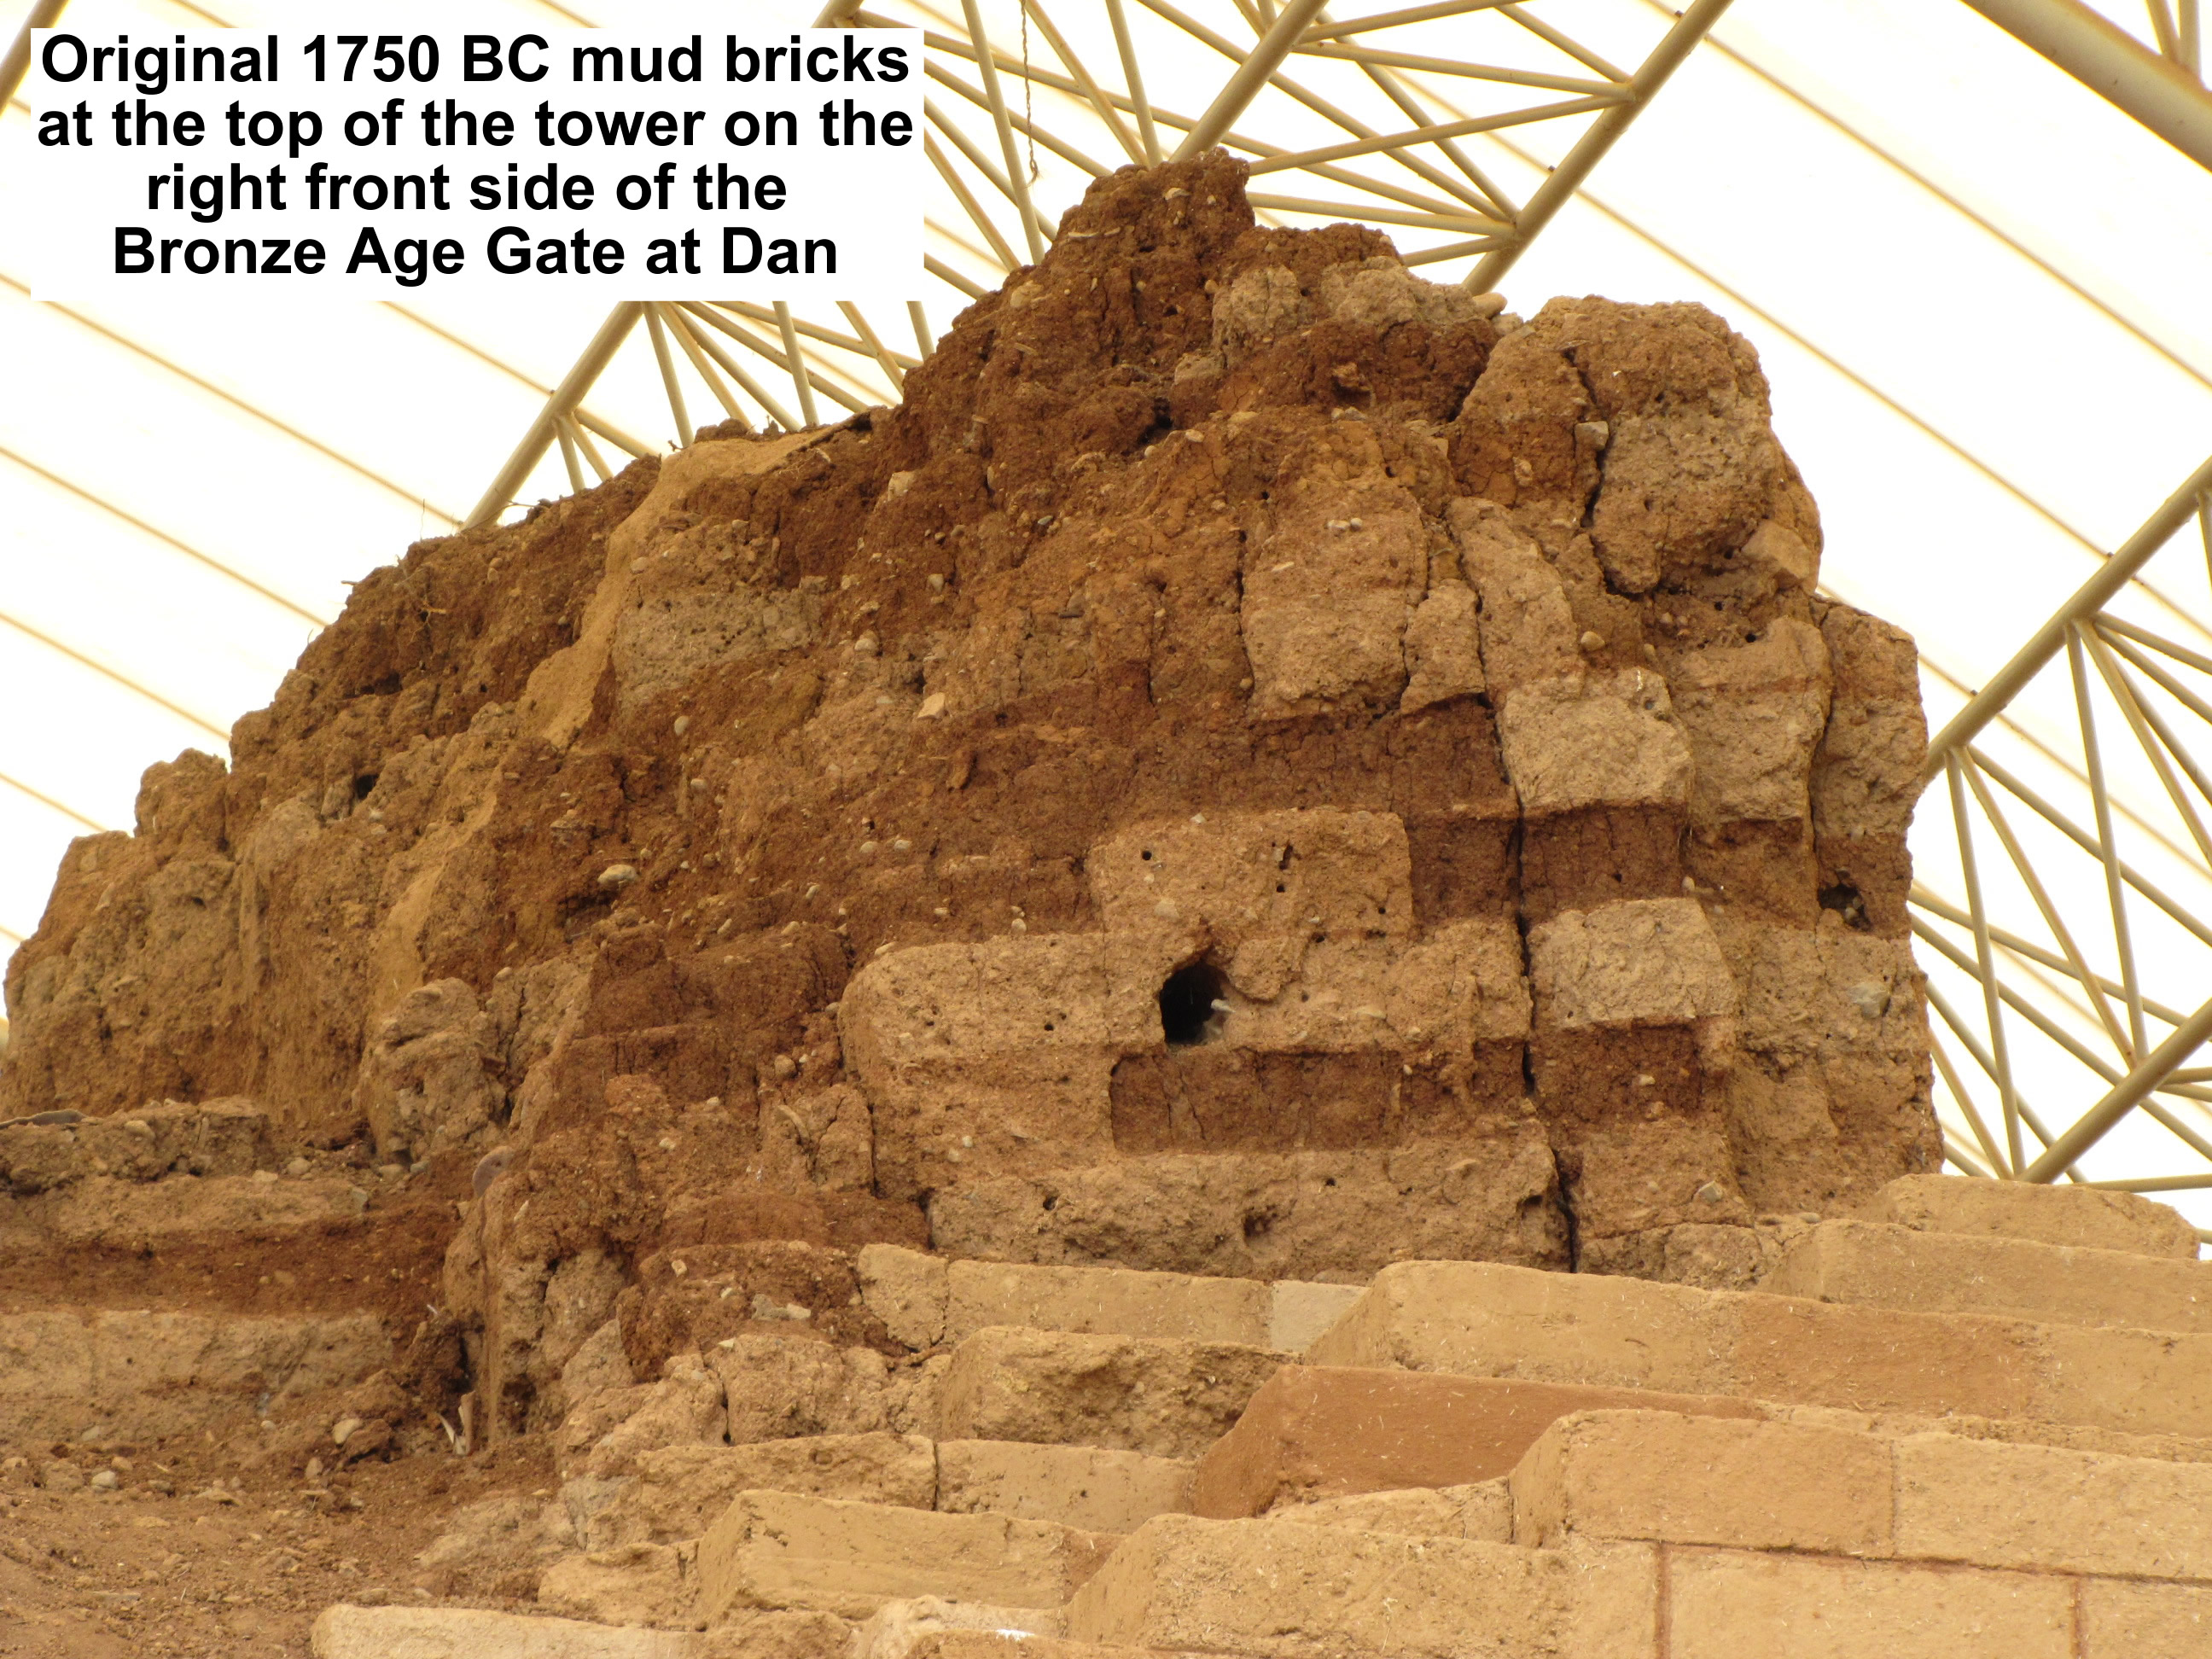 Dan bronze age tower details of original mud bricks at top of tower on right side